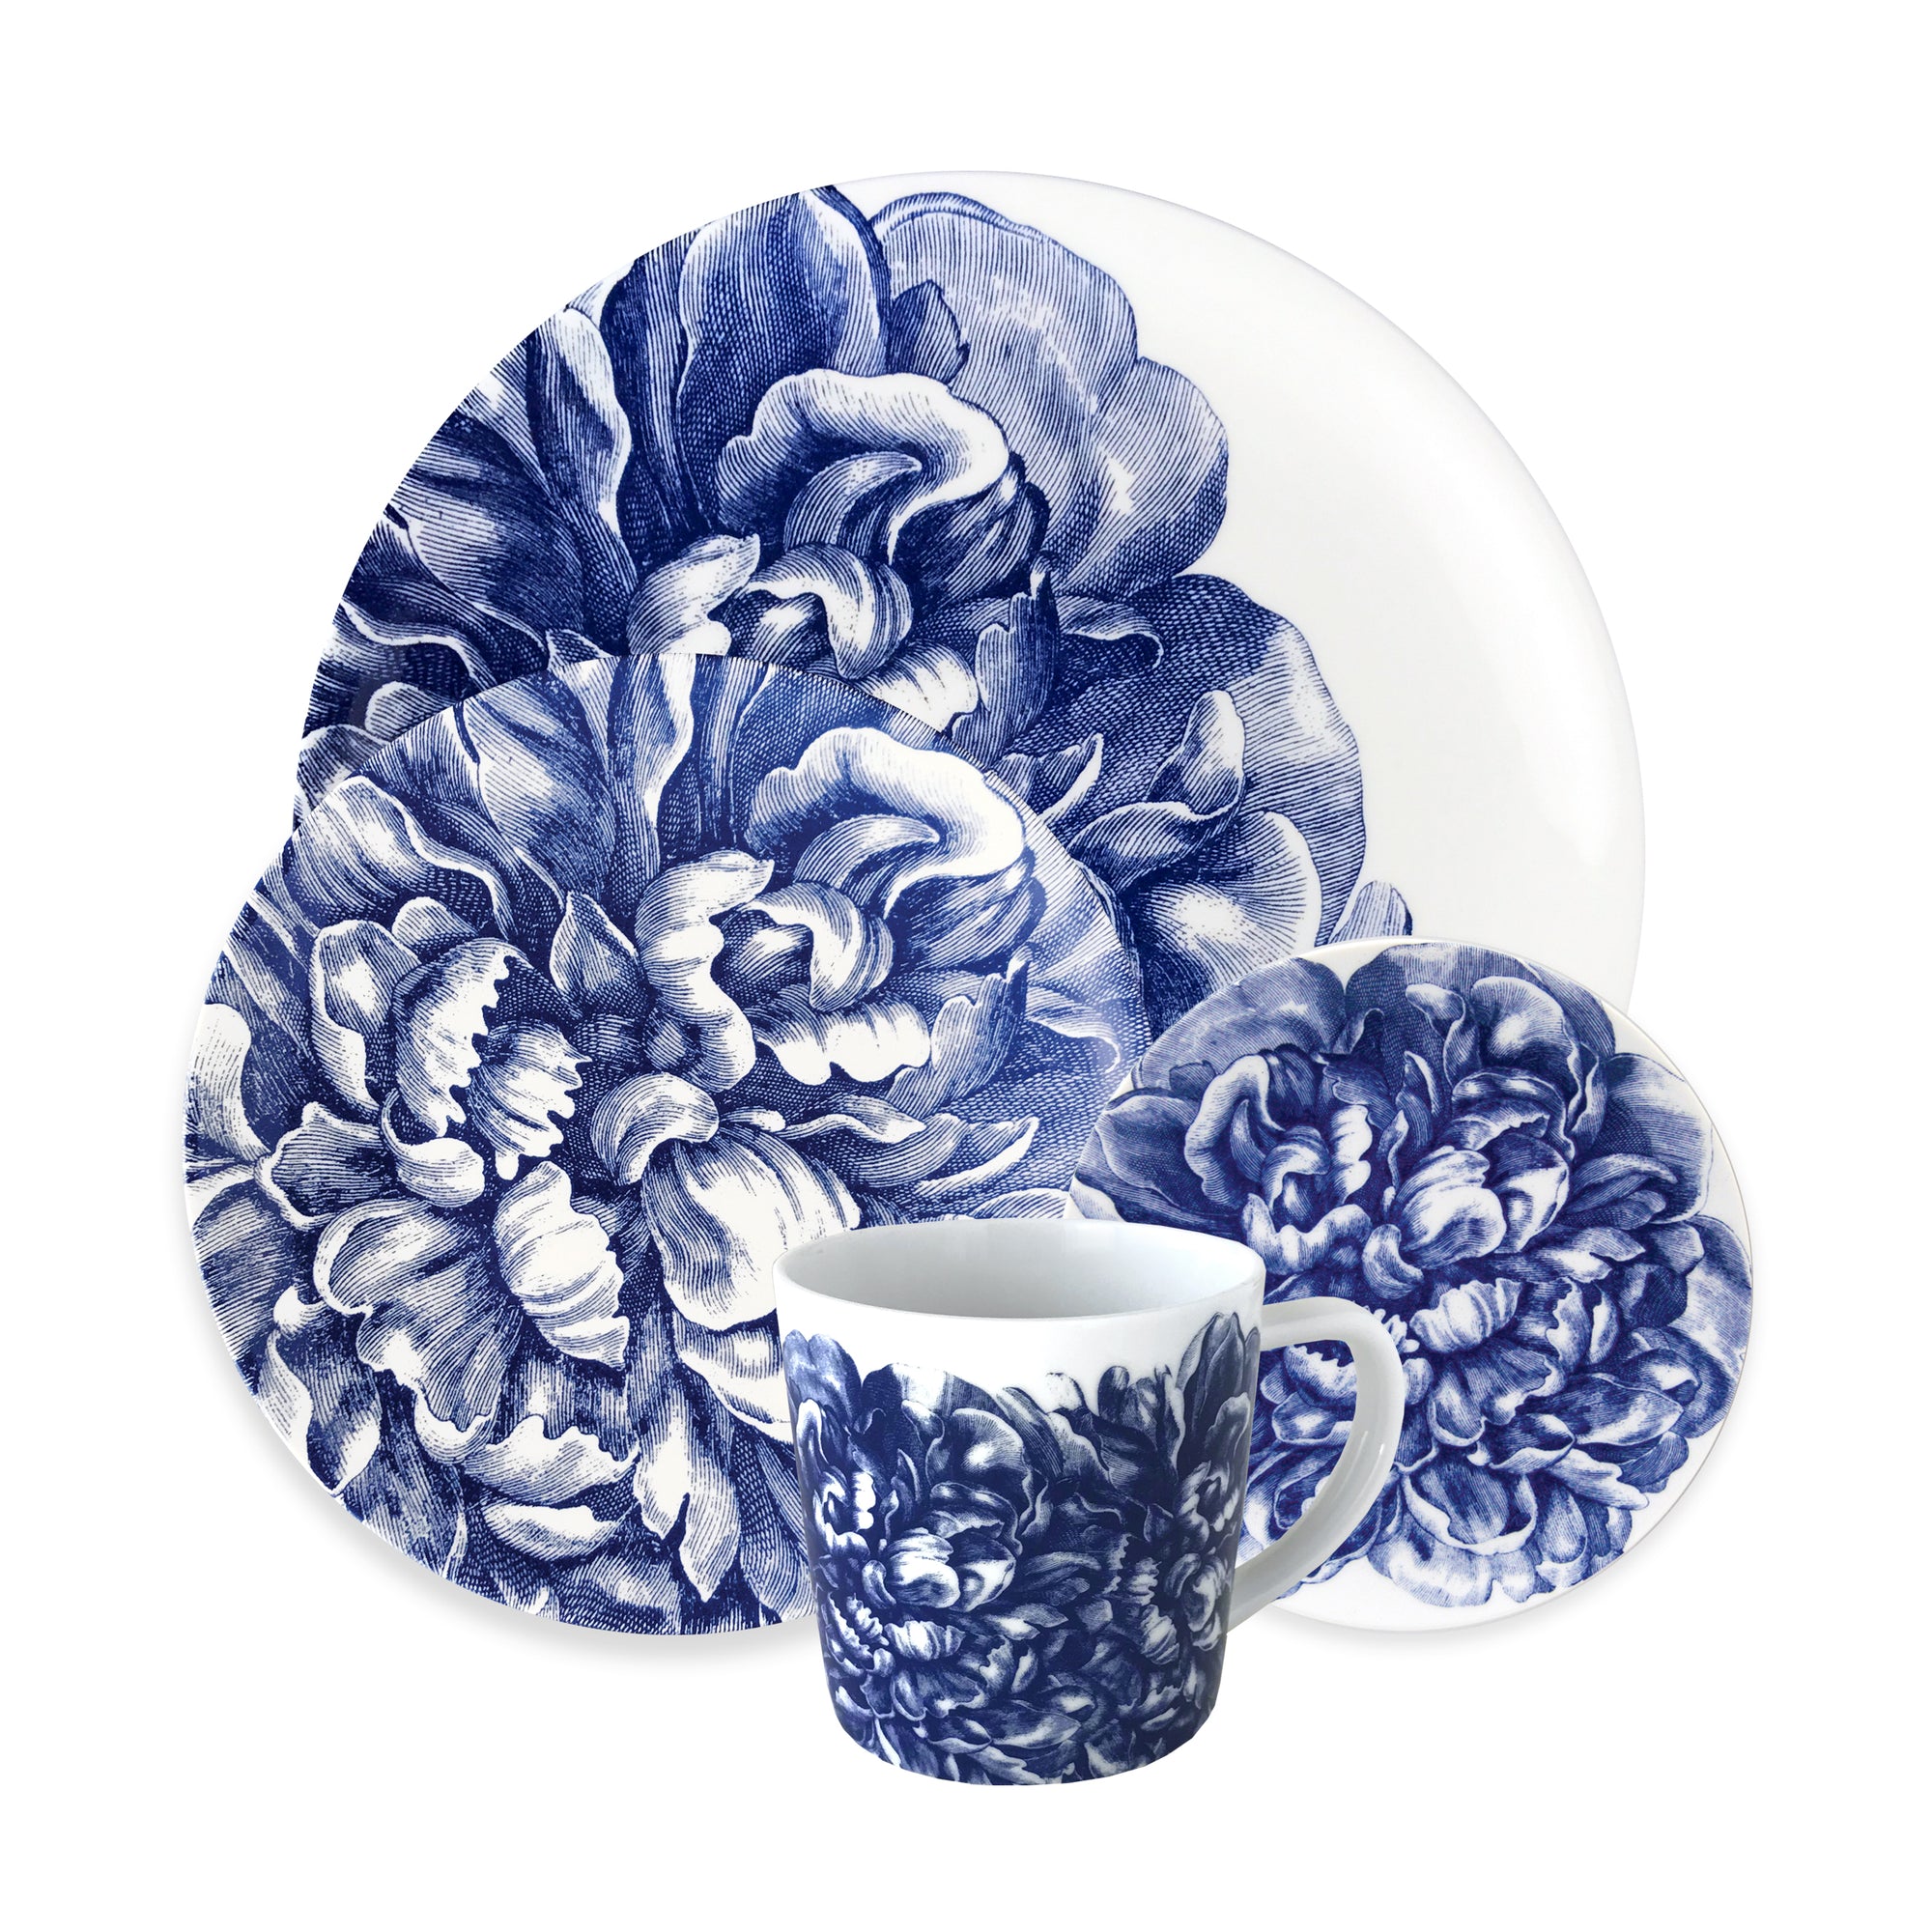 A set of Caskata Artisanal Home Peony 4-Piece Place Setting with a blue floral design, including two plates of different sizes and a small cup, all on a white background.